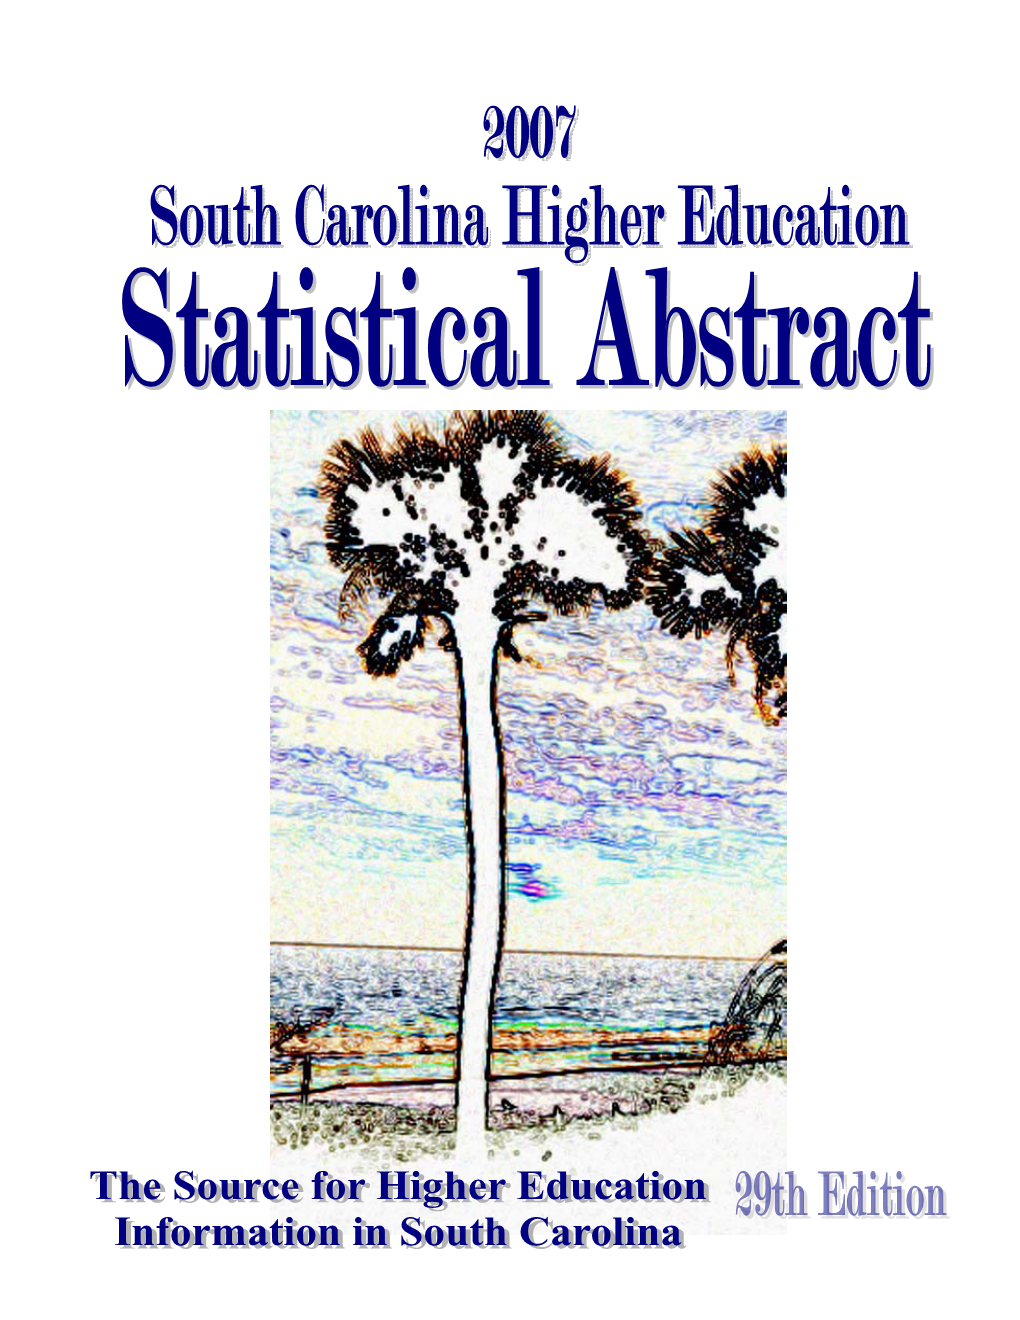 South Carolina Higher Education Statistical Abstract 2007